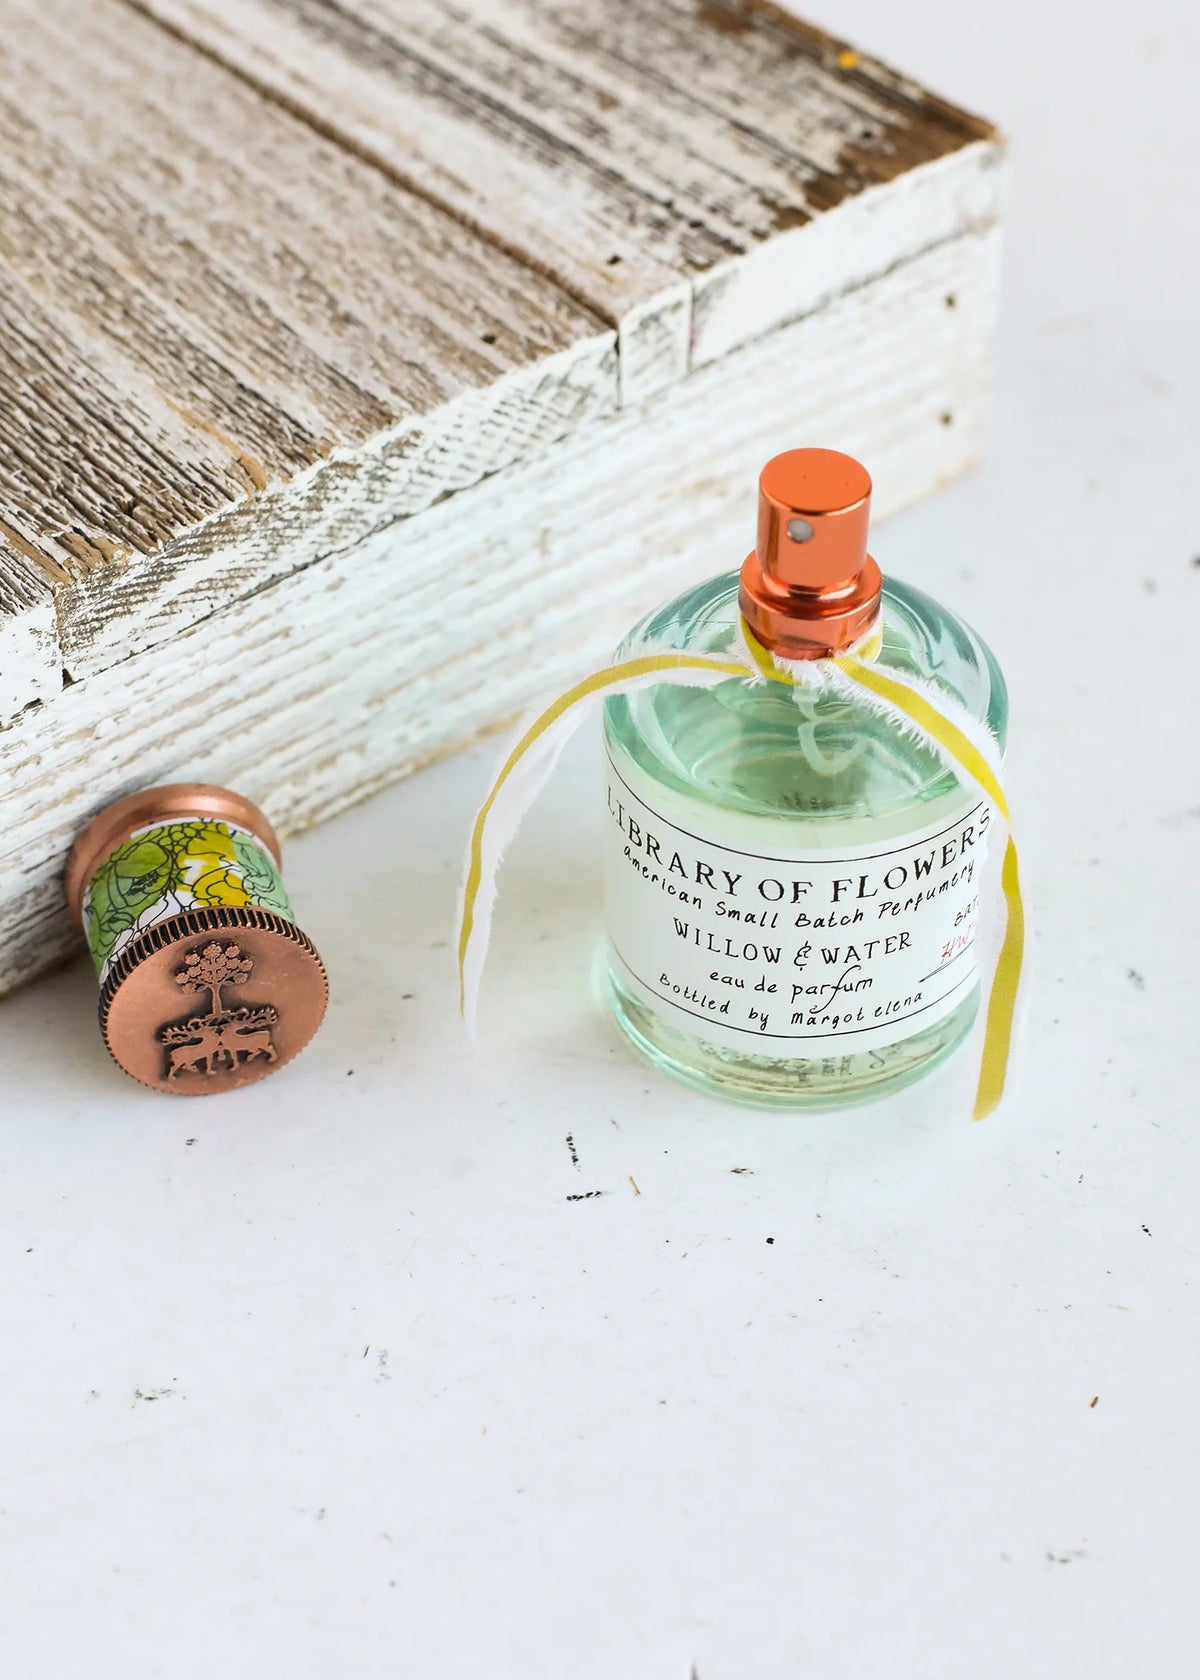 A bottle of Margot Elena's Library of Flowers Willow & Water Eau de Parfum with a floral design next to its copper-colored cap on a white surface, with a wooden box in the background.